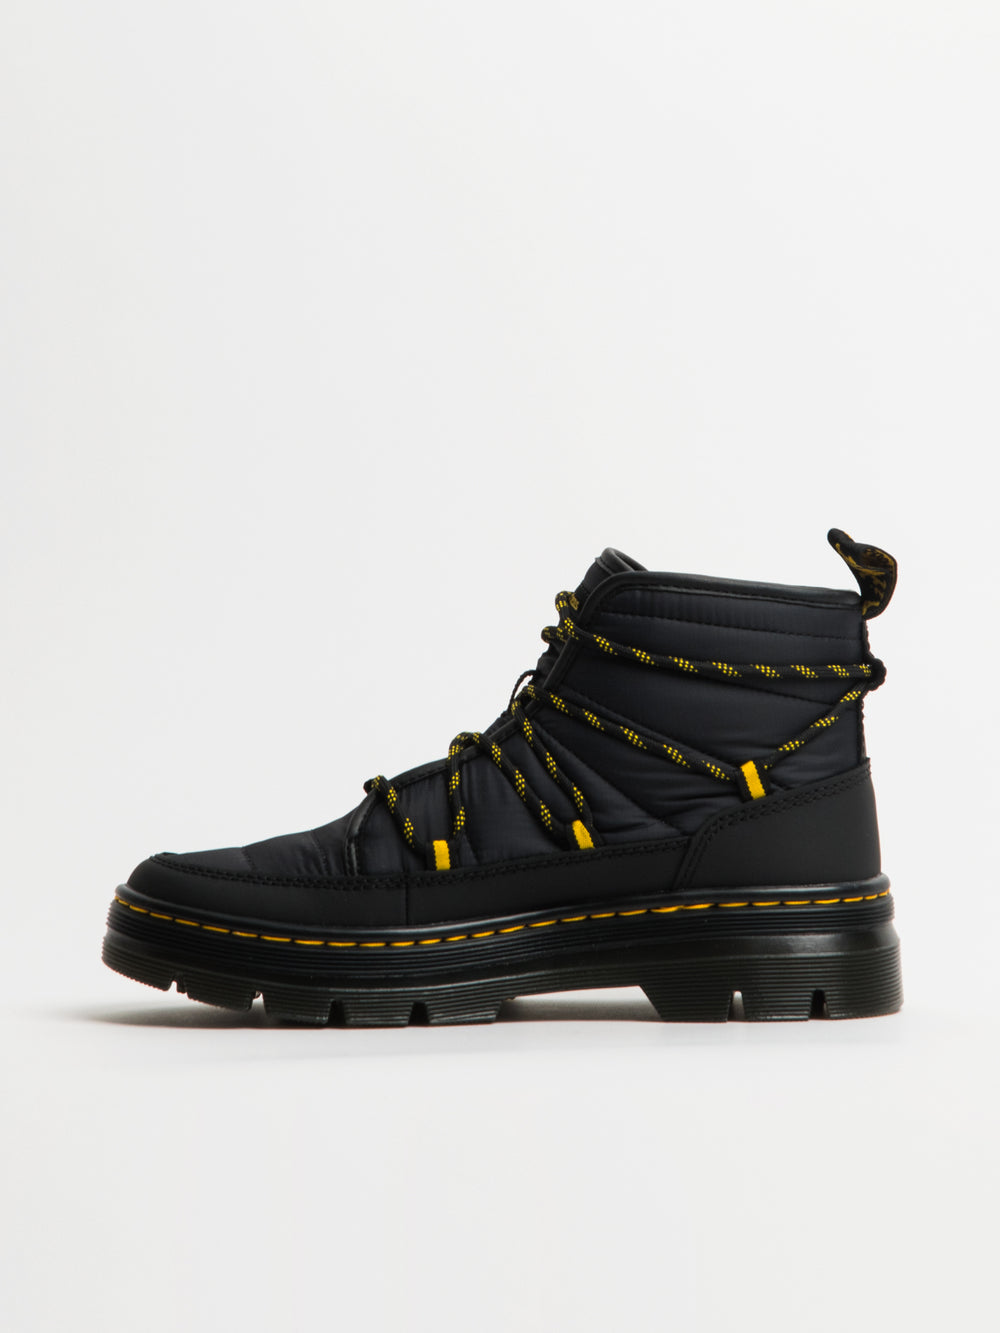 WOMENS DR MARTENS COMBS PADDED WARM QUILTED